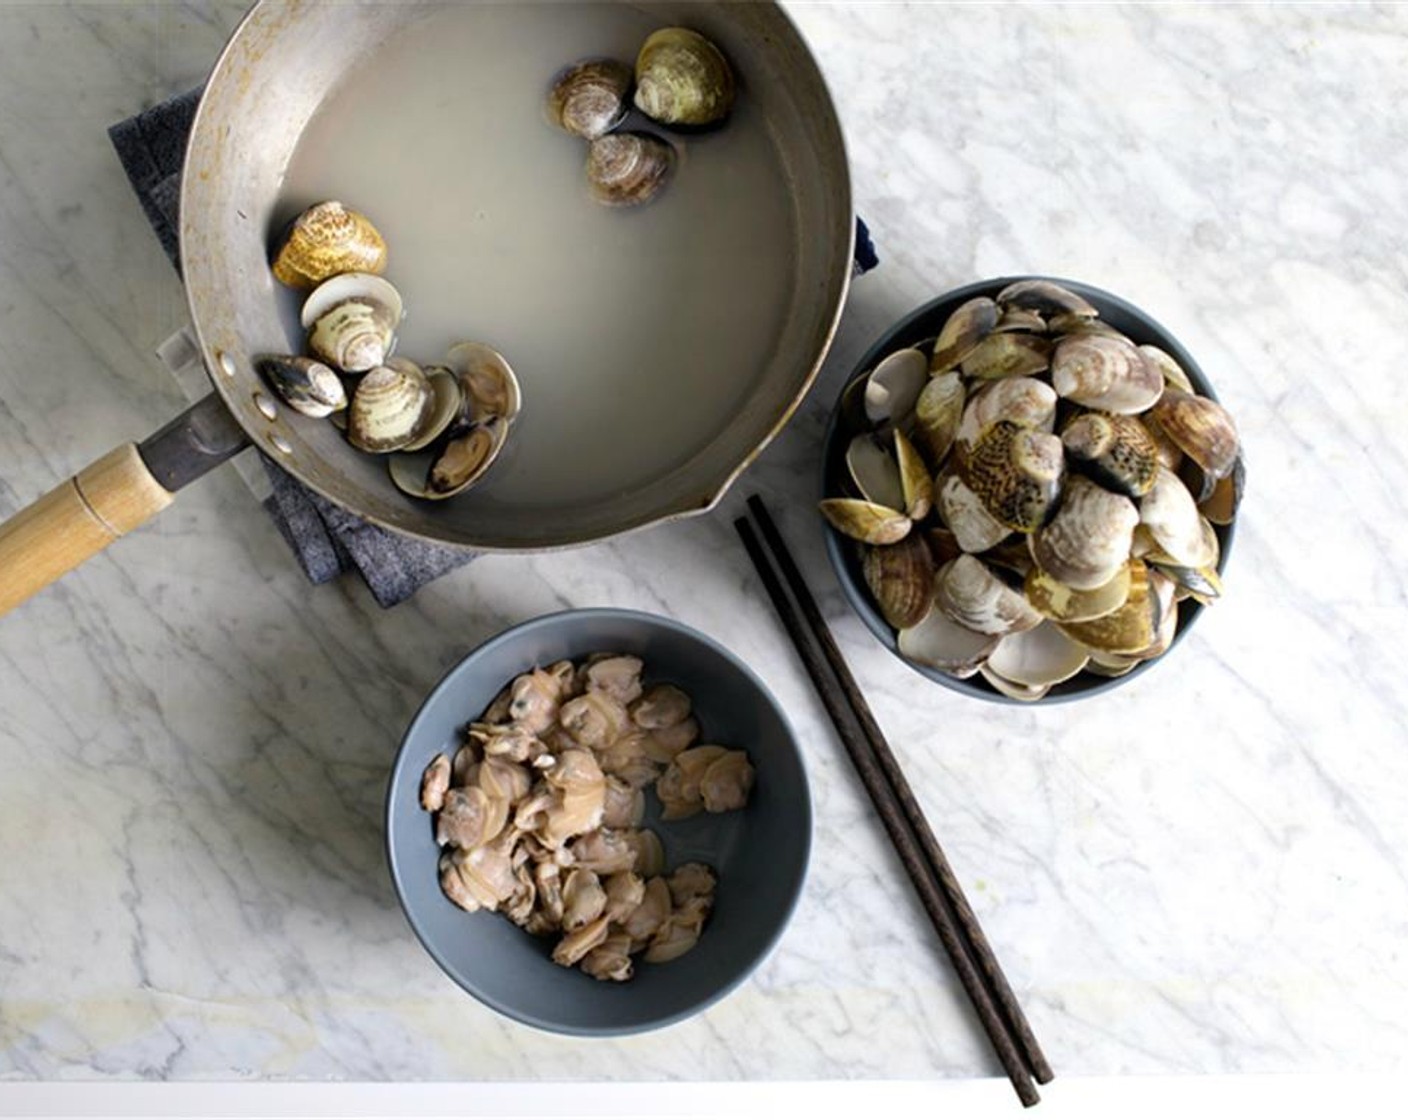 step 2 Combine the fresh little neck clams in a pot with Sake (1/4 cup), then put the lid on and cook over medium-high heat for 2 to 3 minutes, until they're all opened. Remove the meats and discard shells. You'll have a cup of meat.